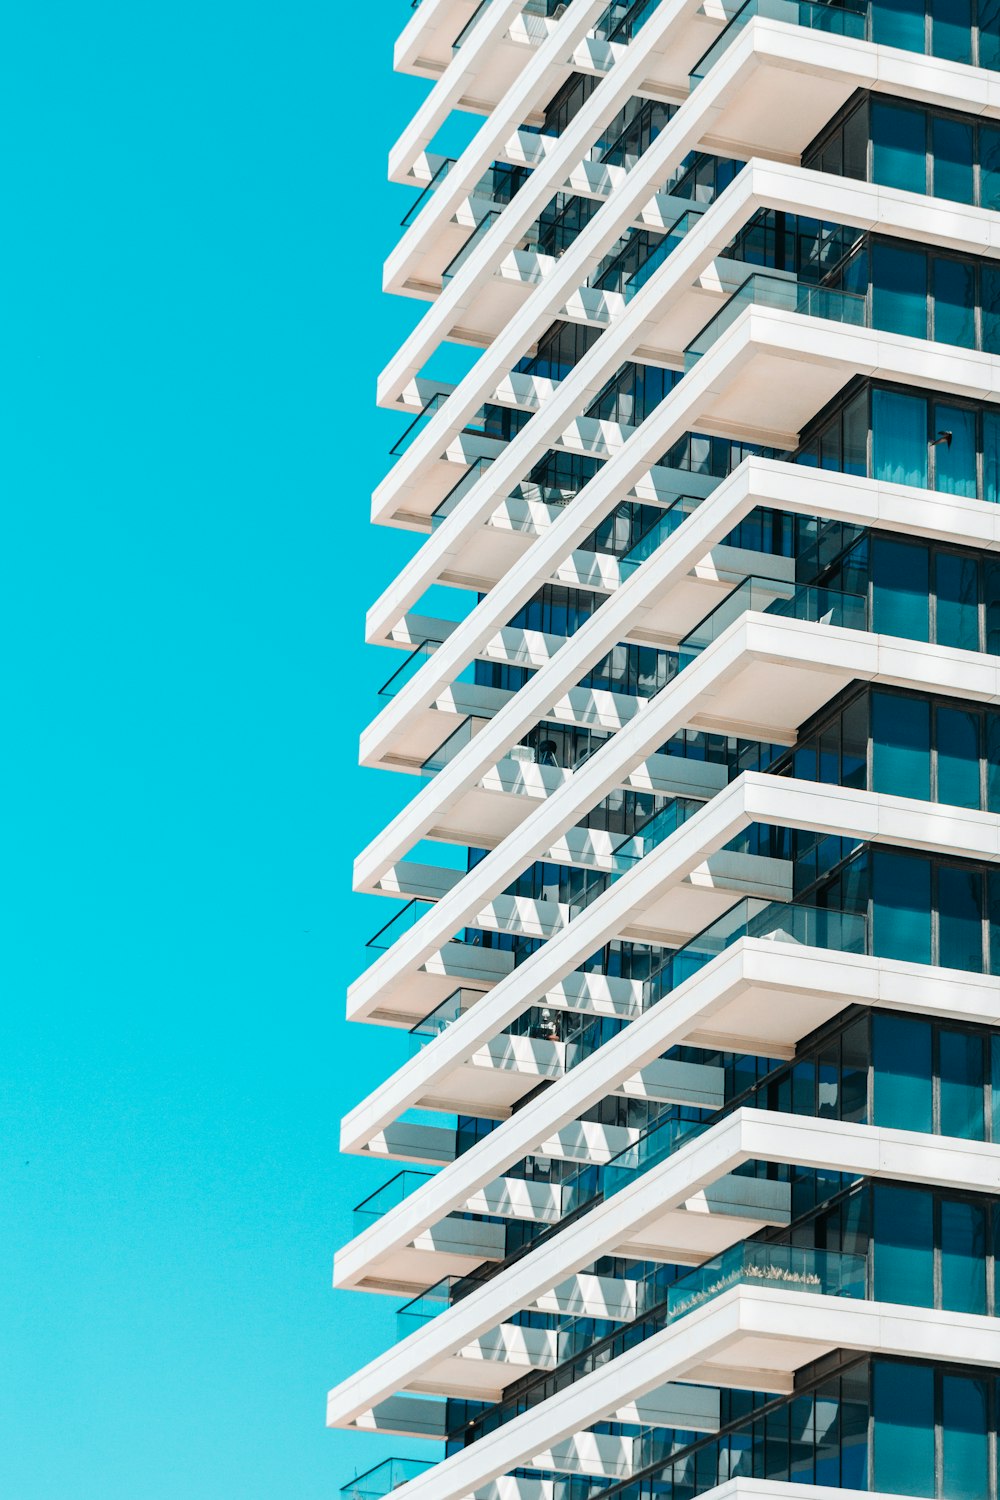 a tall white building with balconies against a blue sky